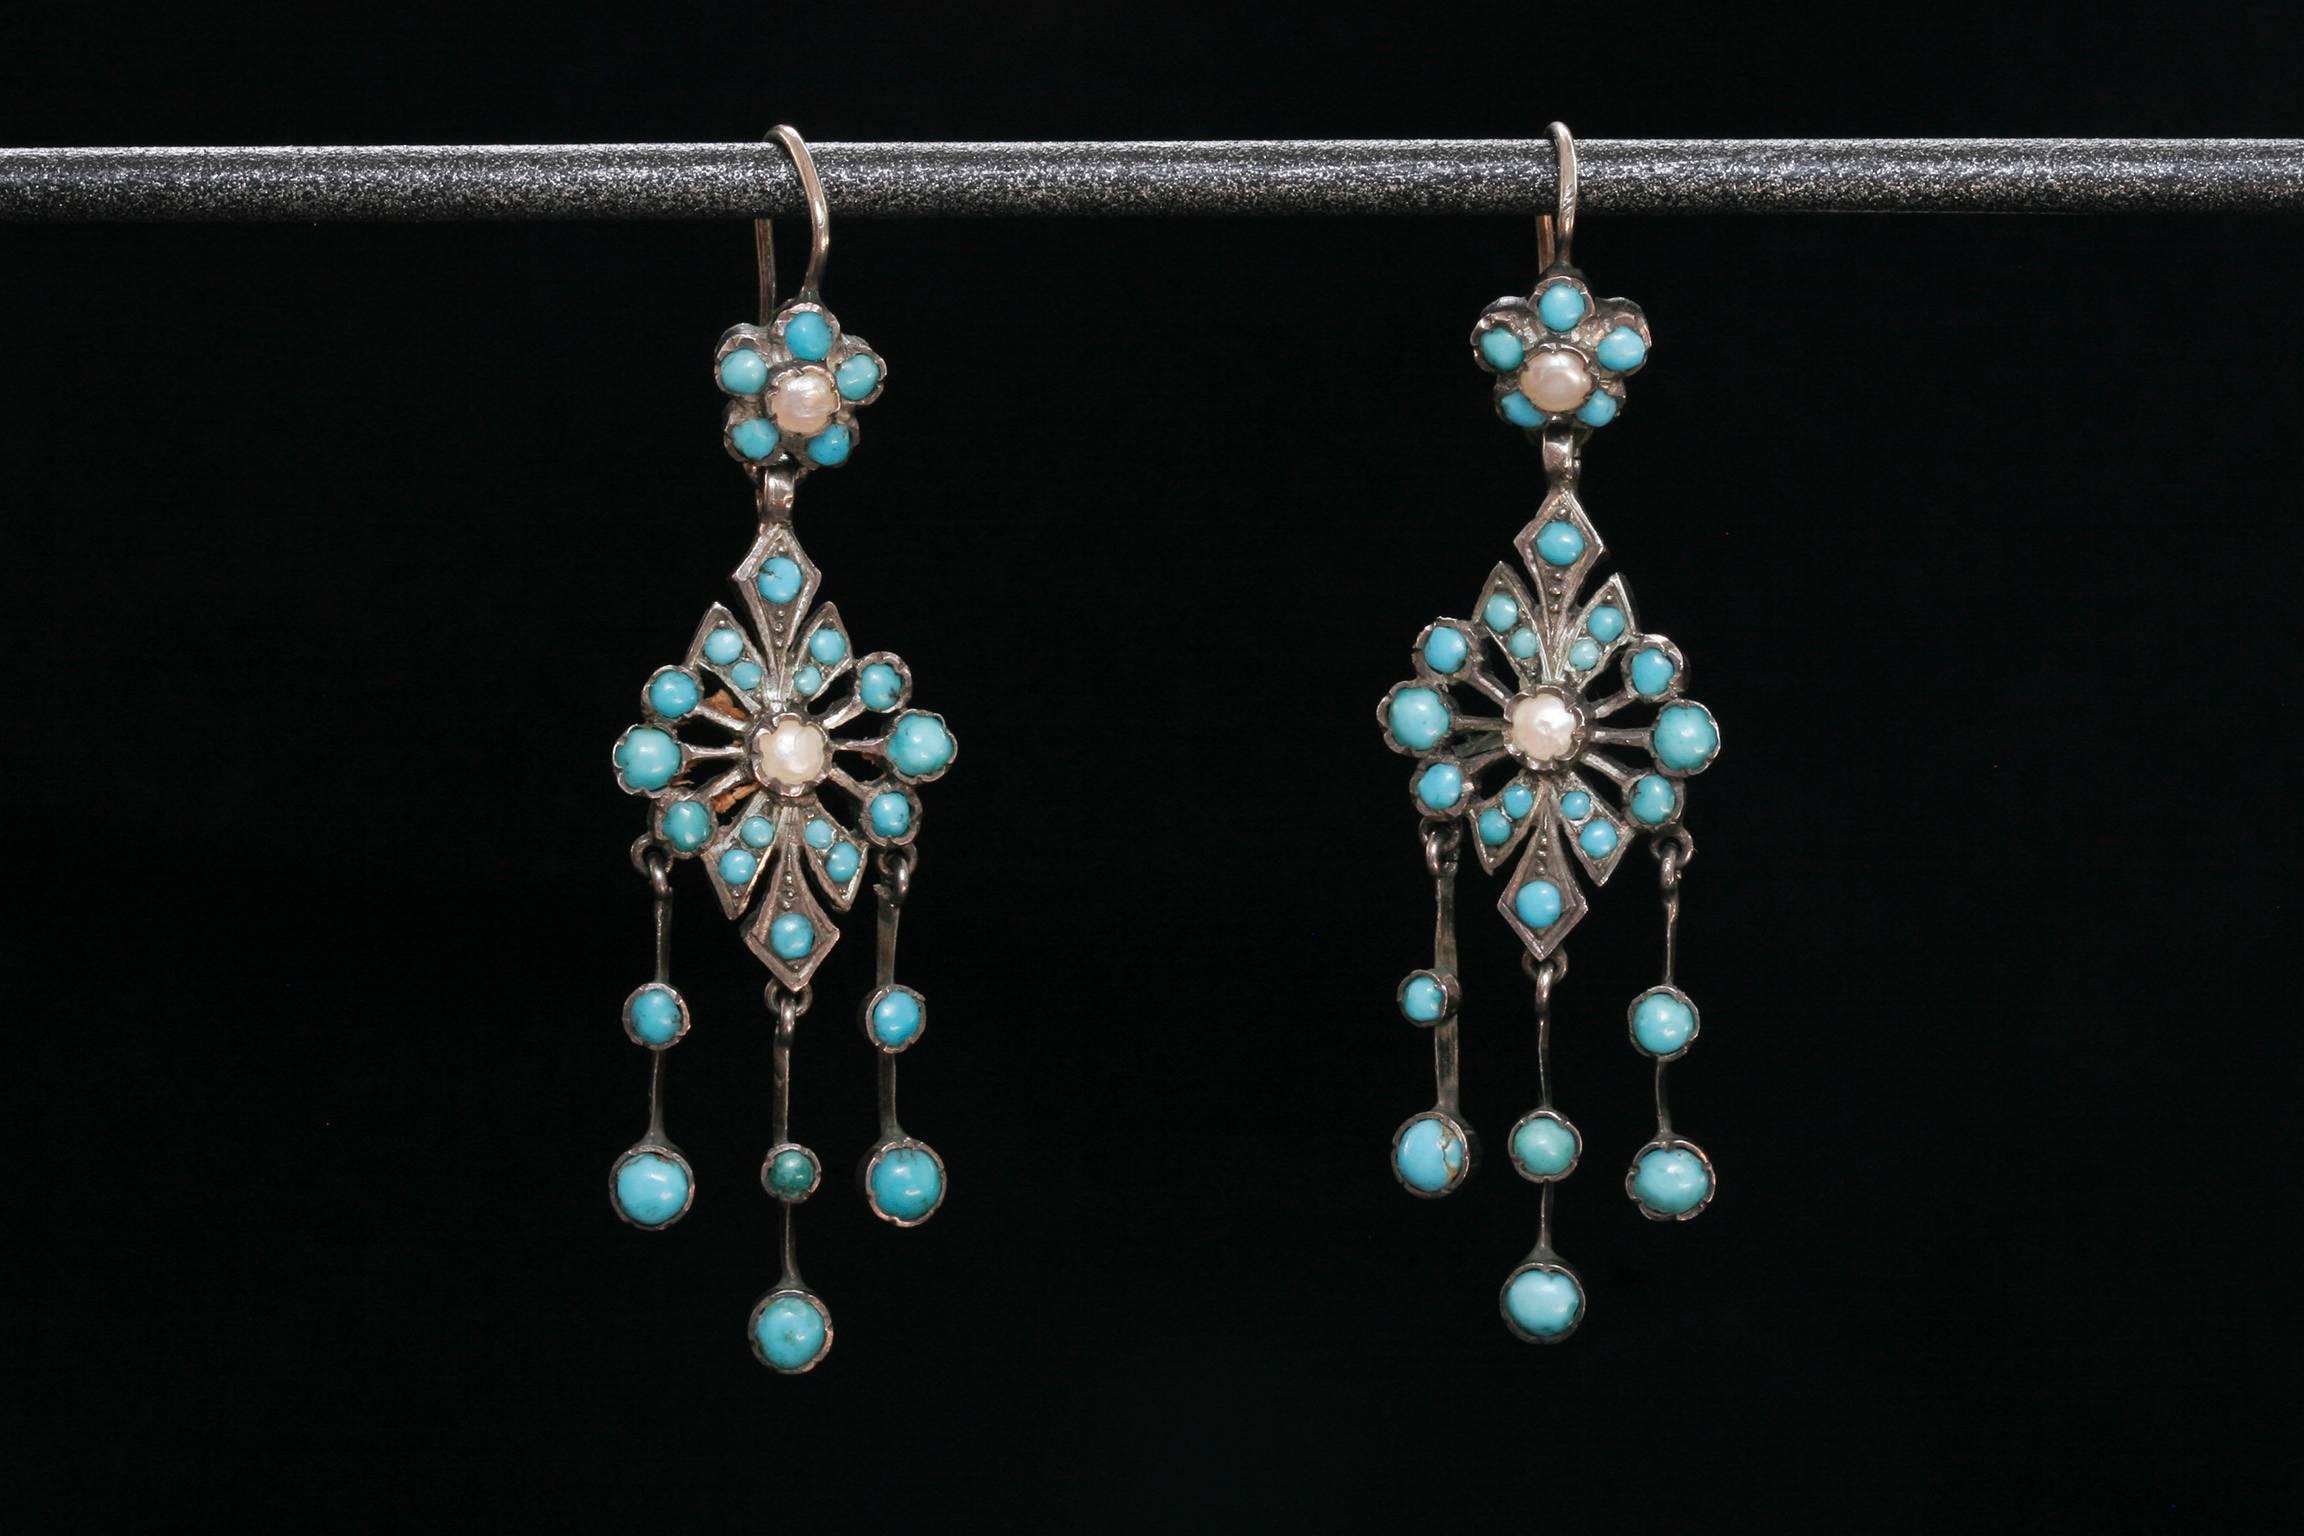 C.1860. A very pretty and delicate turquoise chandelier earrings.
A diamond shaped centerpiece is adorned with small turquoise stones with a seed pearl at the center. Additionally, three delicate strands with two turquoise stones hang from the